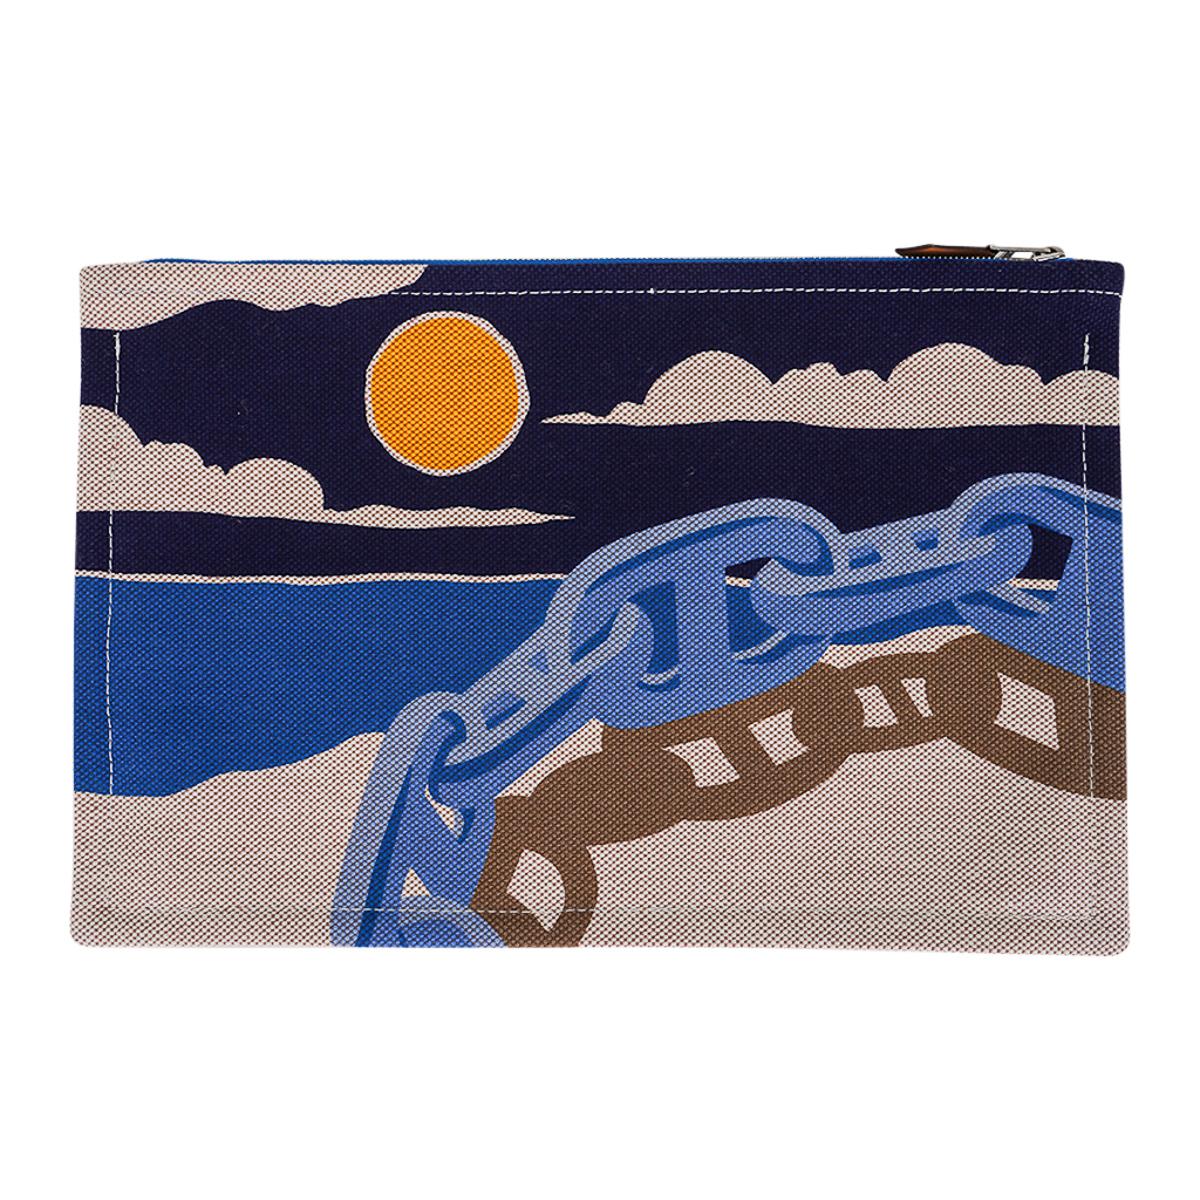 Mightychic offers an Hermes Escale a la Plage flat case featured in Ciel/Nuit.
Designed by Mathieu Cosse and inspired by the Chaine d'Ancre.
Depicted lying in the sand relfecting the chaging time of day.
Top zipper with embossed metal pull.
Created